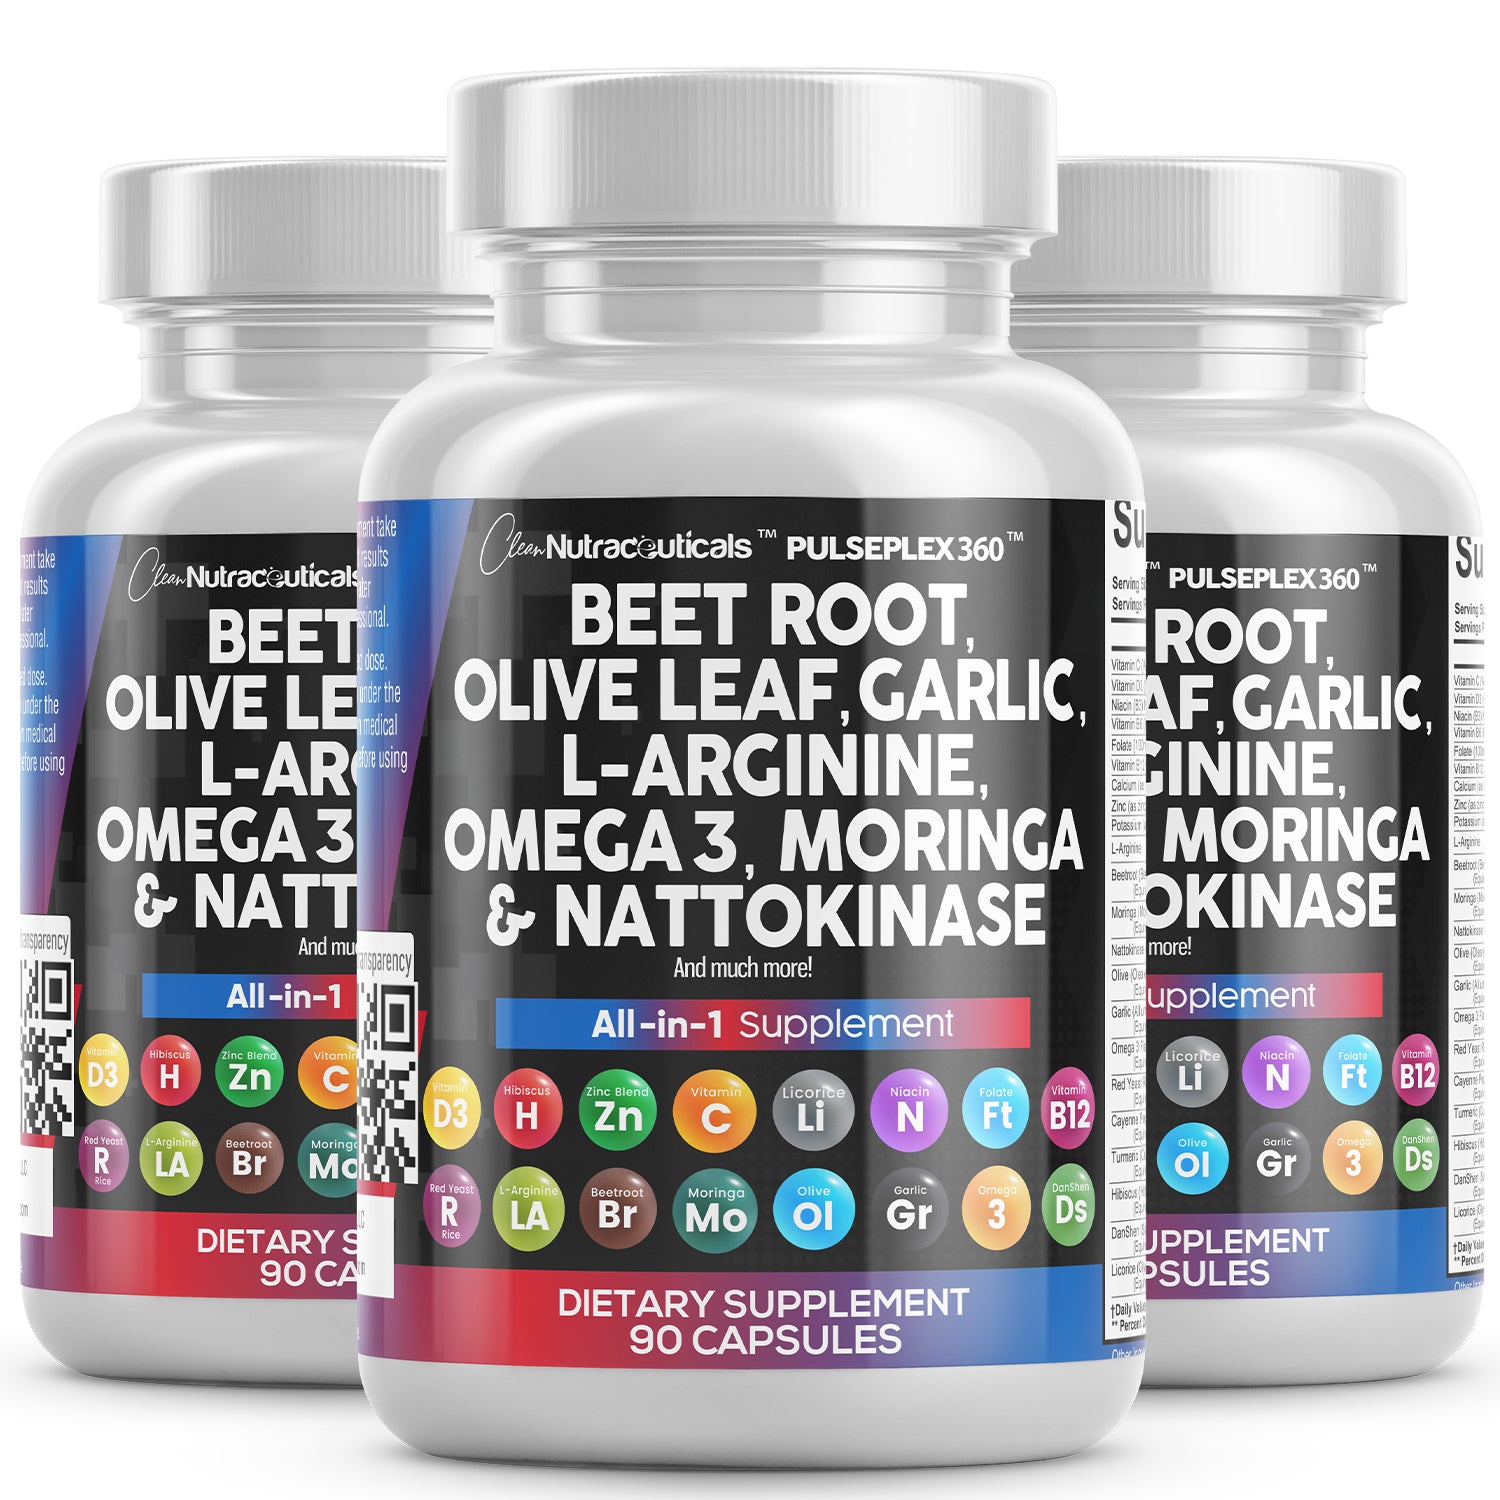 Pulseplex 360™ with Beet Root and Olive Leaf